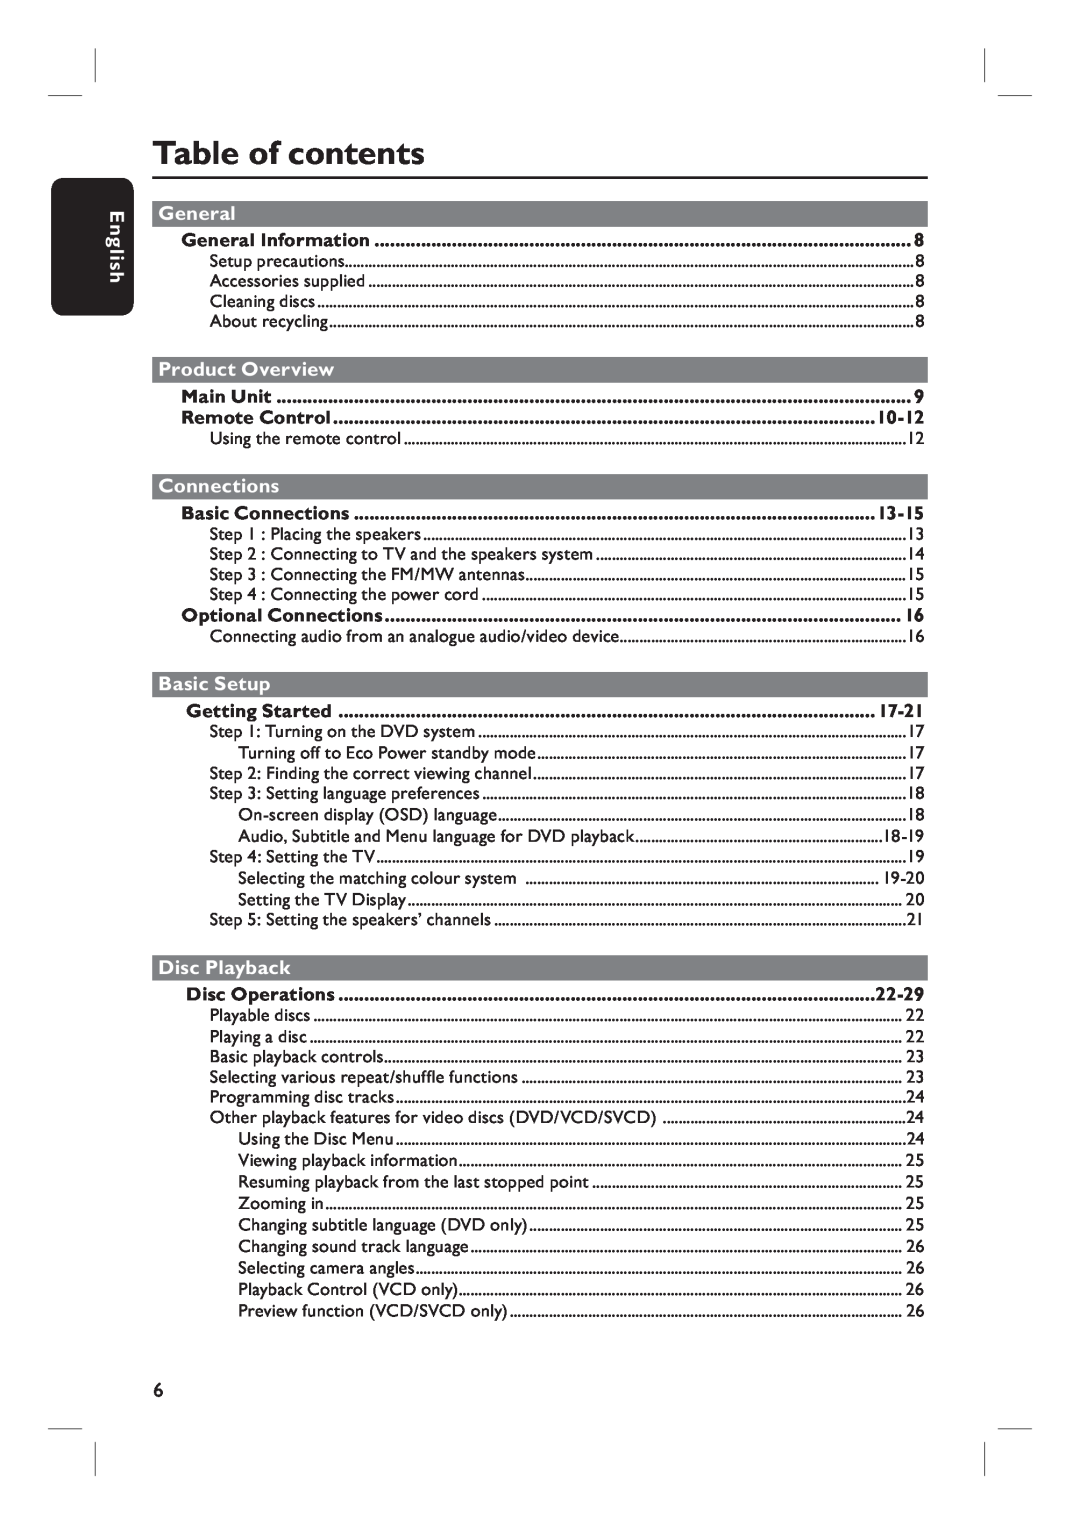 Philips HTS3100 user manual Table of contents, General, Product Overview, Connections, Basic Setup, Disc Playback, English 